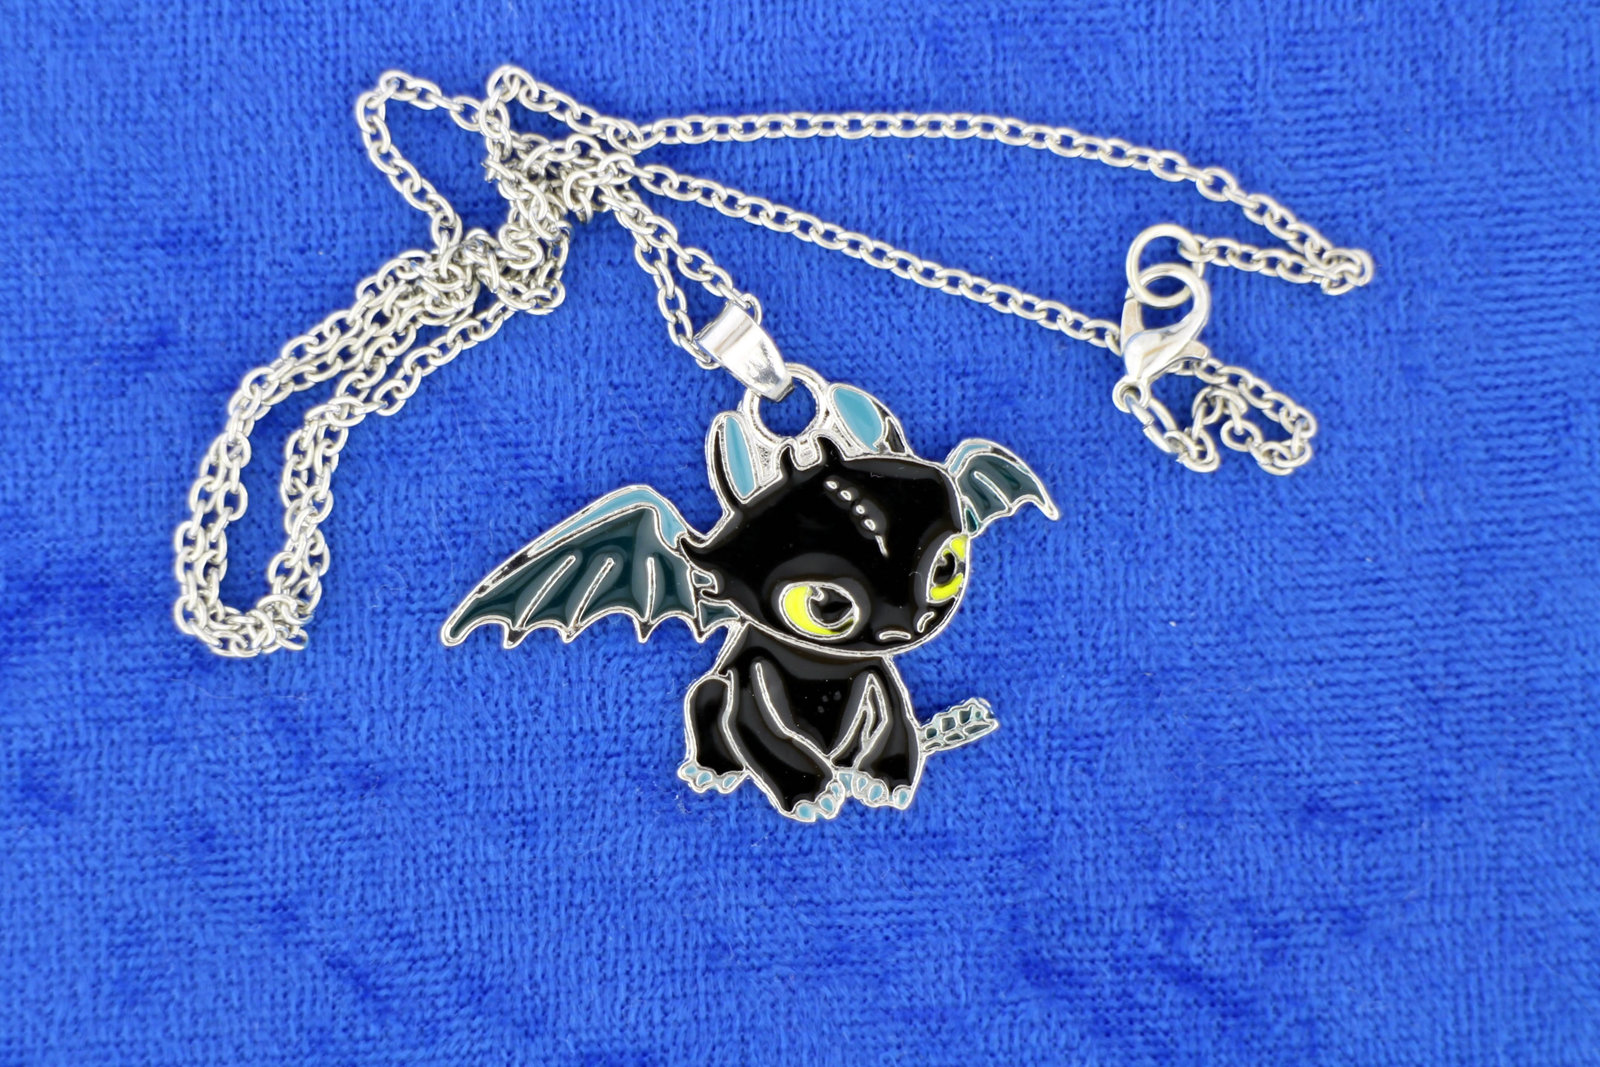 Nightcrawler Toothless Necklace or Keychain How To Train Your Dragon - $4.99 - $6.49